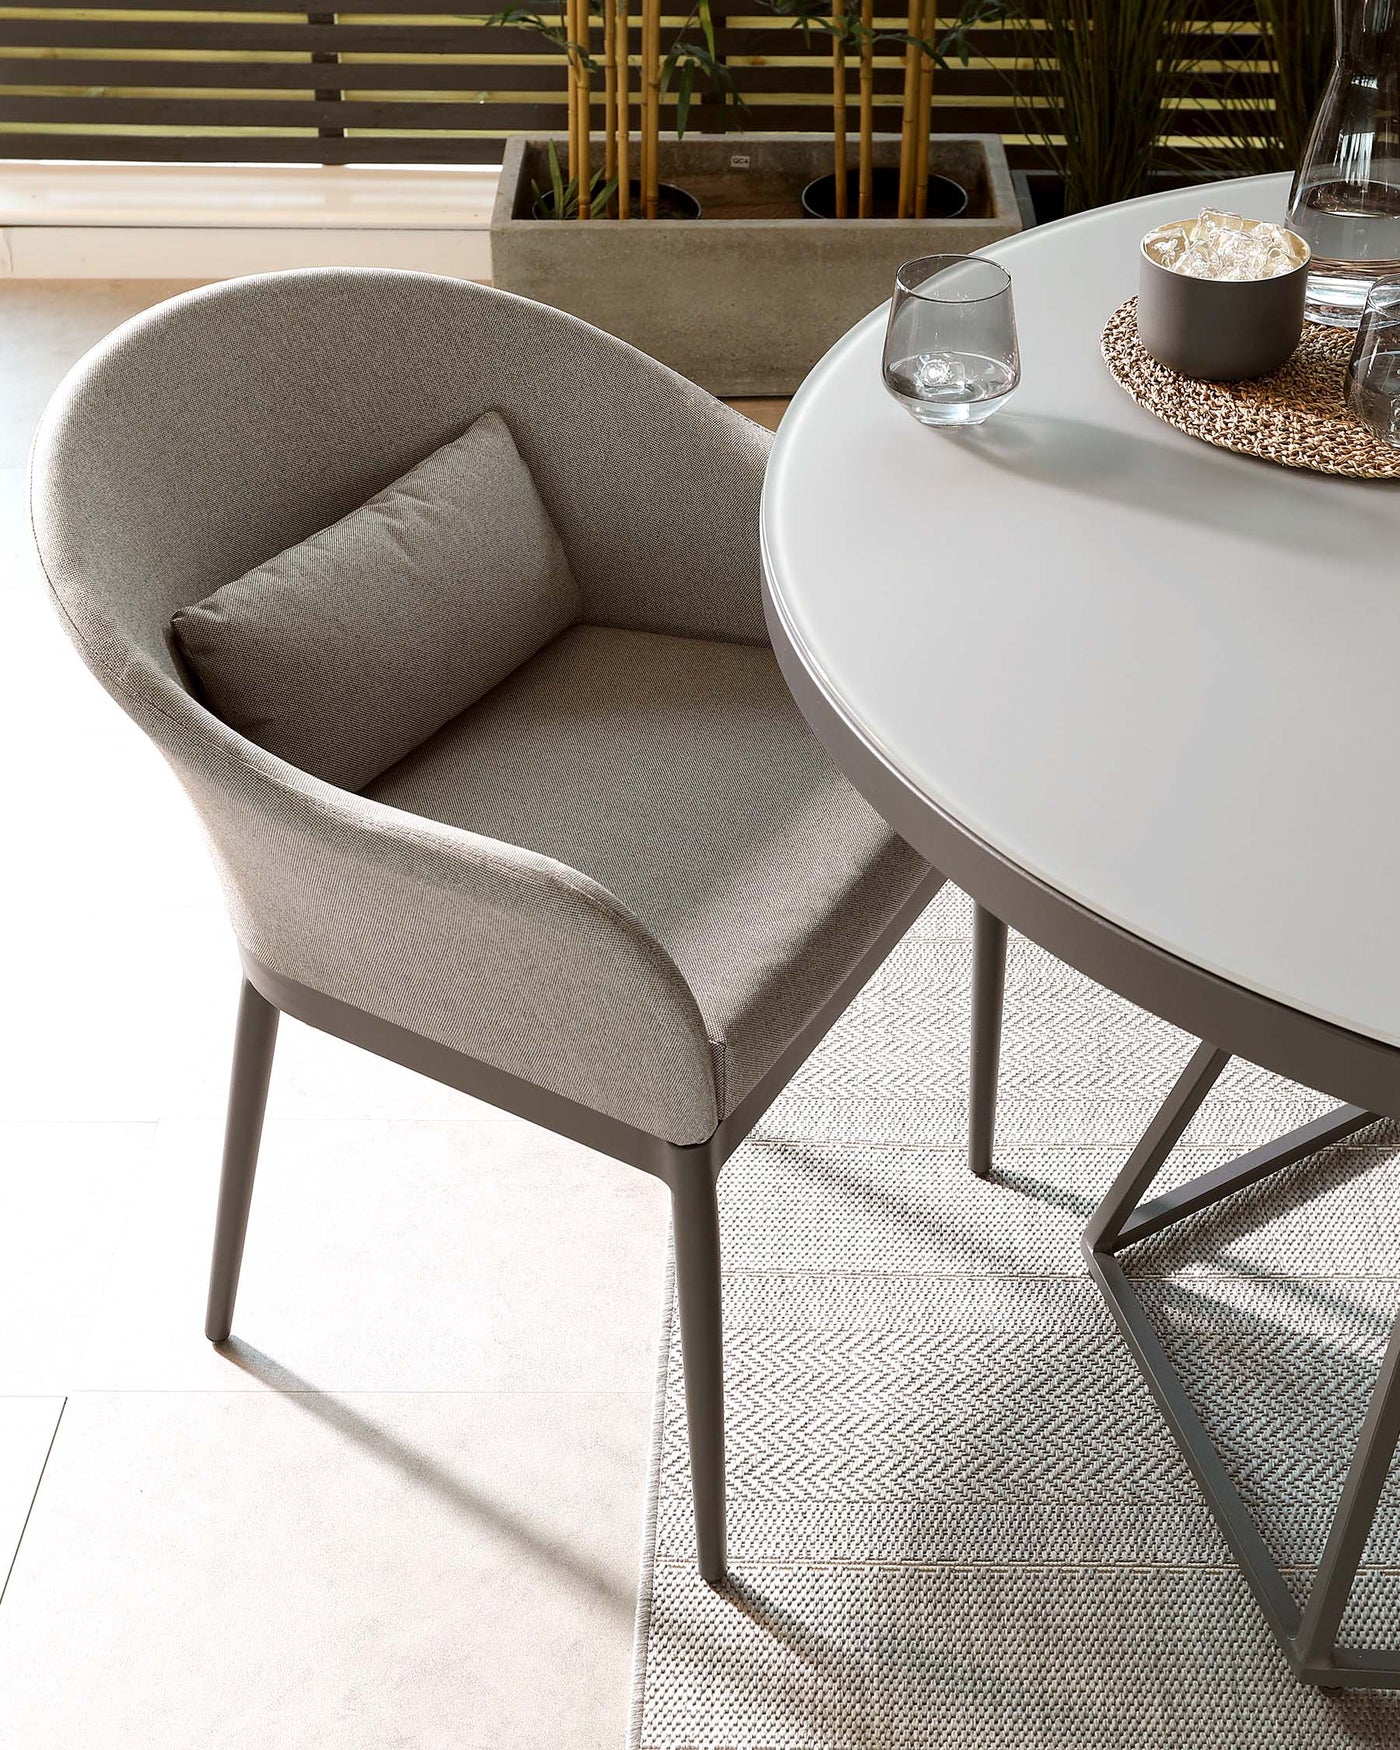 Modern, round white dining table with sleek, grey metal legs paired with a contemporary light grey upholstered chair featuring a curved backrest, cushioned seat, and square metal legs.